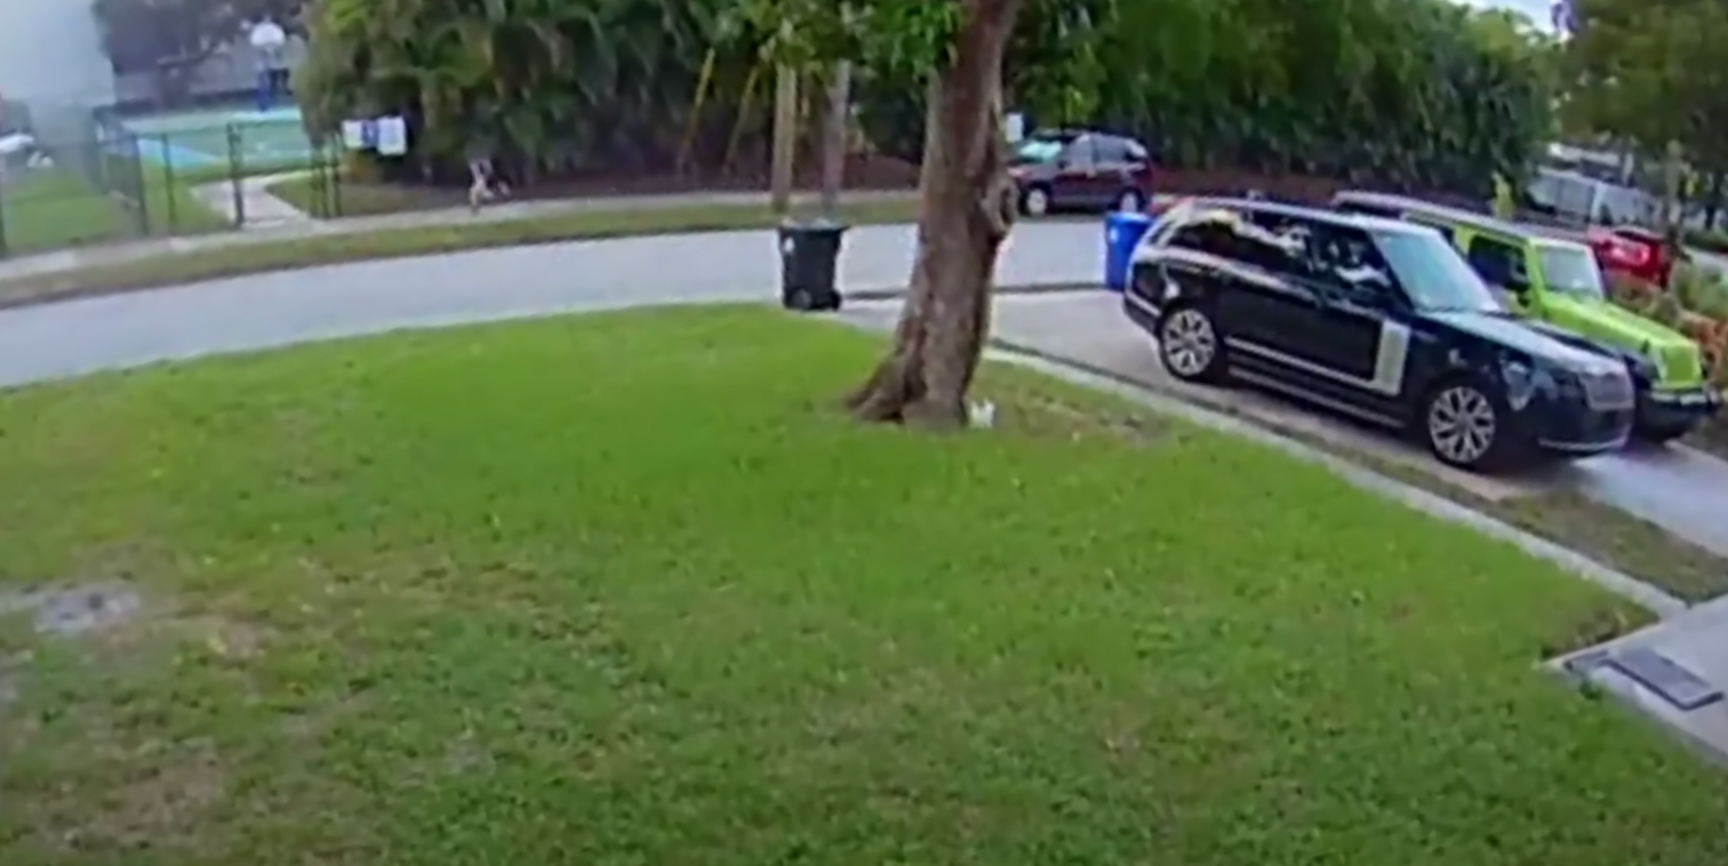 A ten-year-old escapes an alleged kidnapping attempt in Ft Lauderdale.